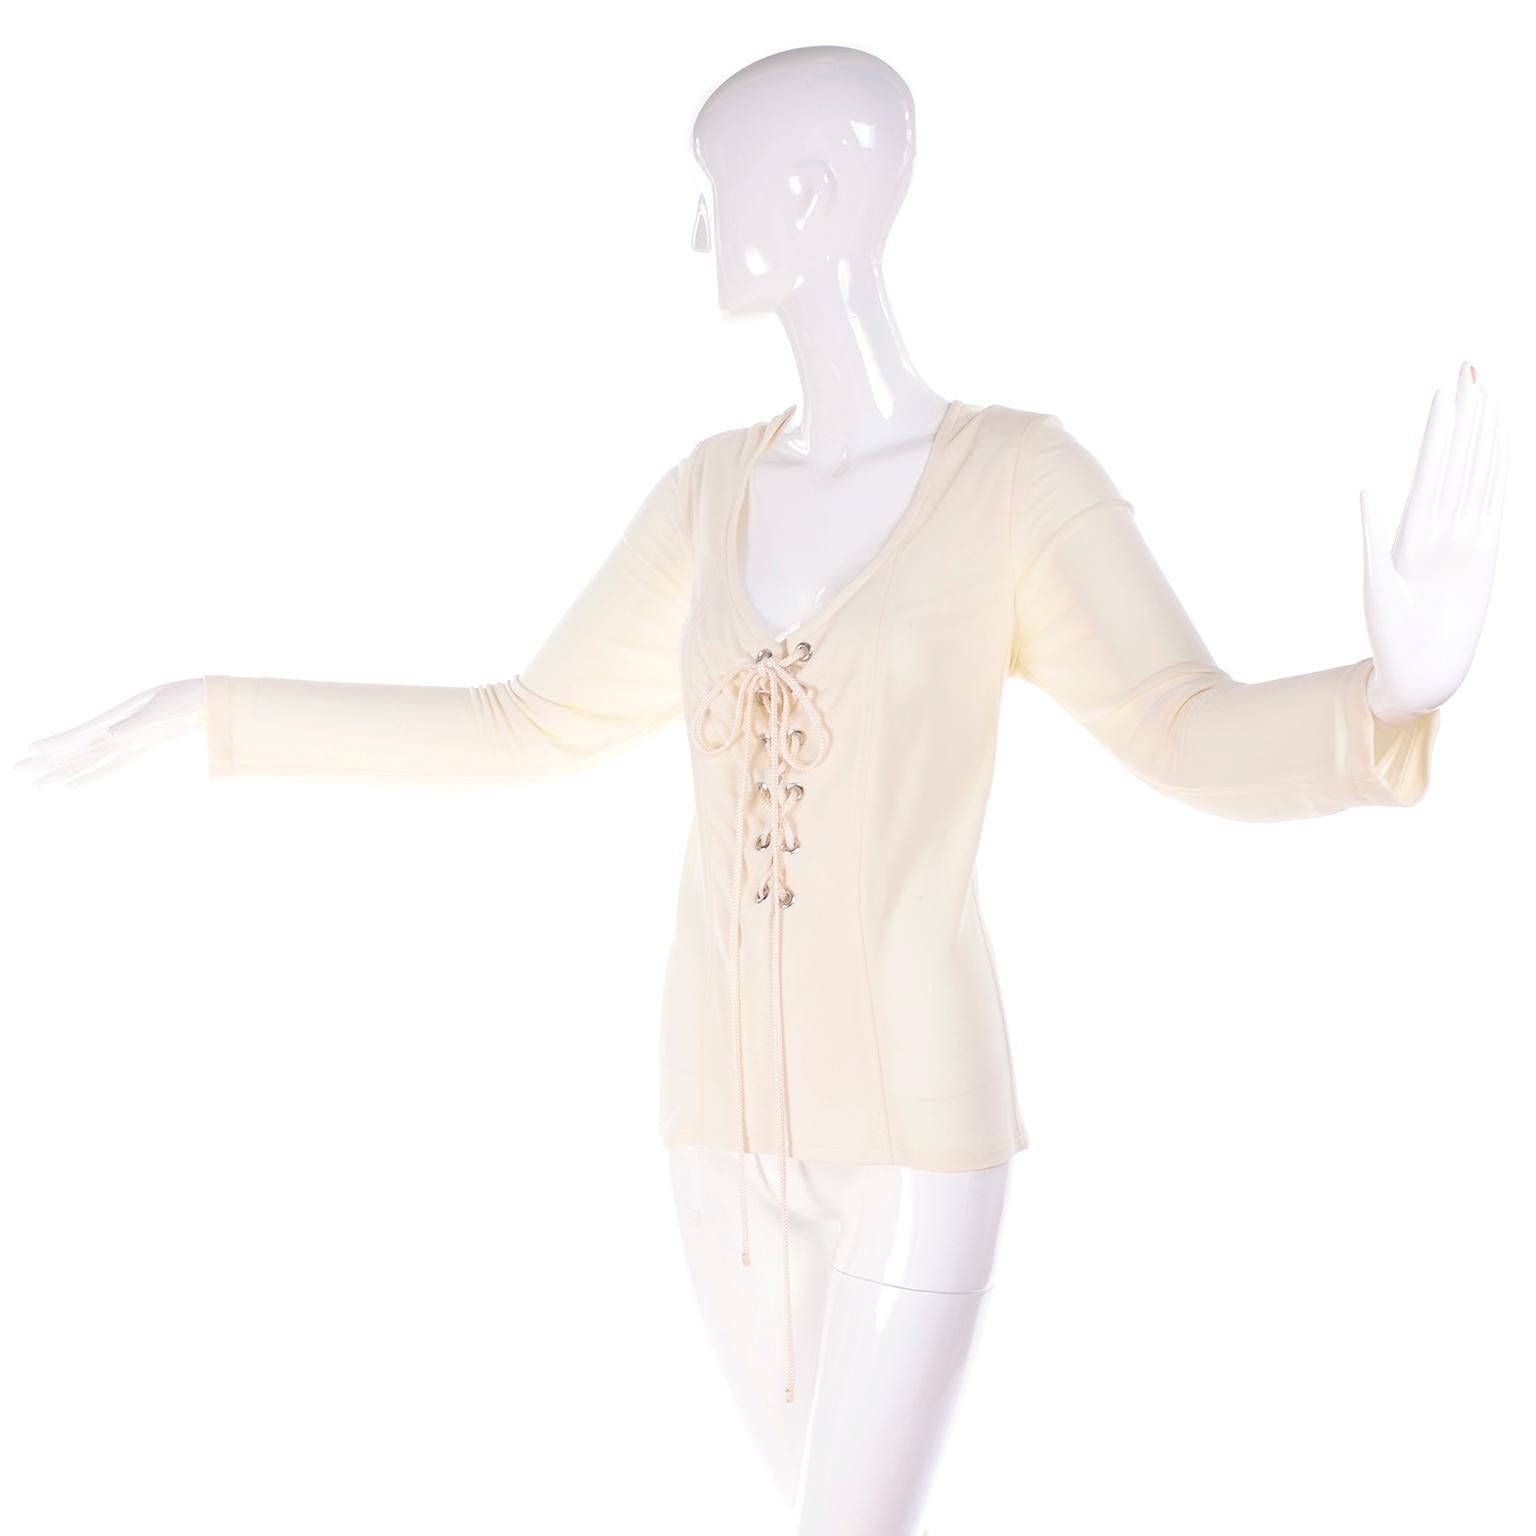 Yves Saint Laurent Top YSL Rive Gauche Lace Up Blouse in Cream Silk Jersey 42 5